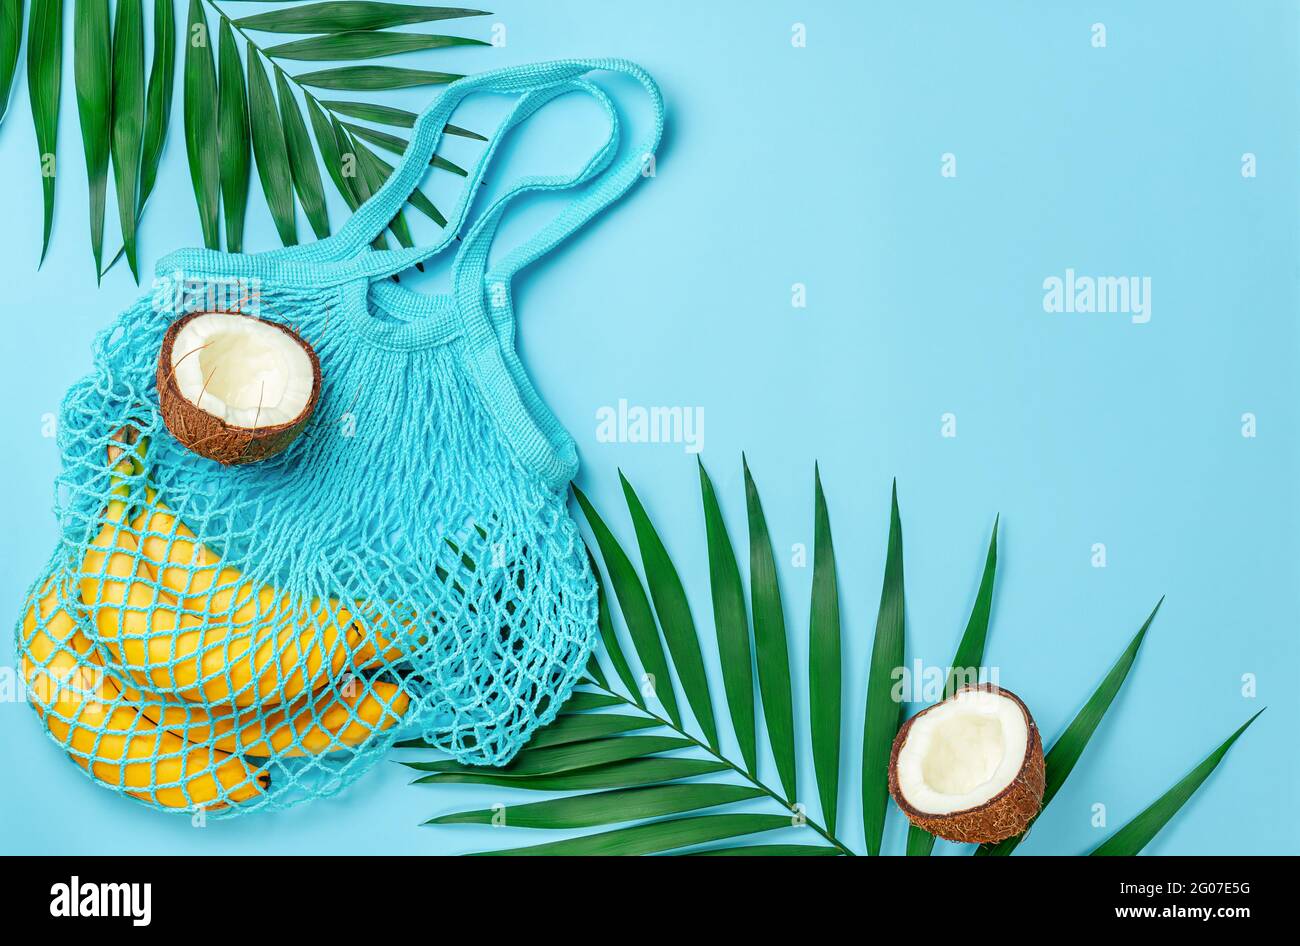 Zero waste mesh bag with bananas and coconut on bright blue background. Directly above, copy space. Stock Photo